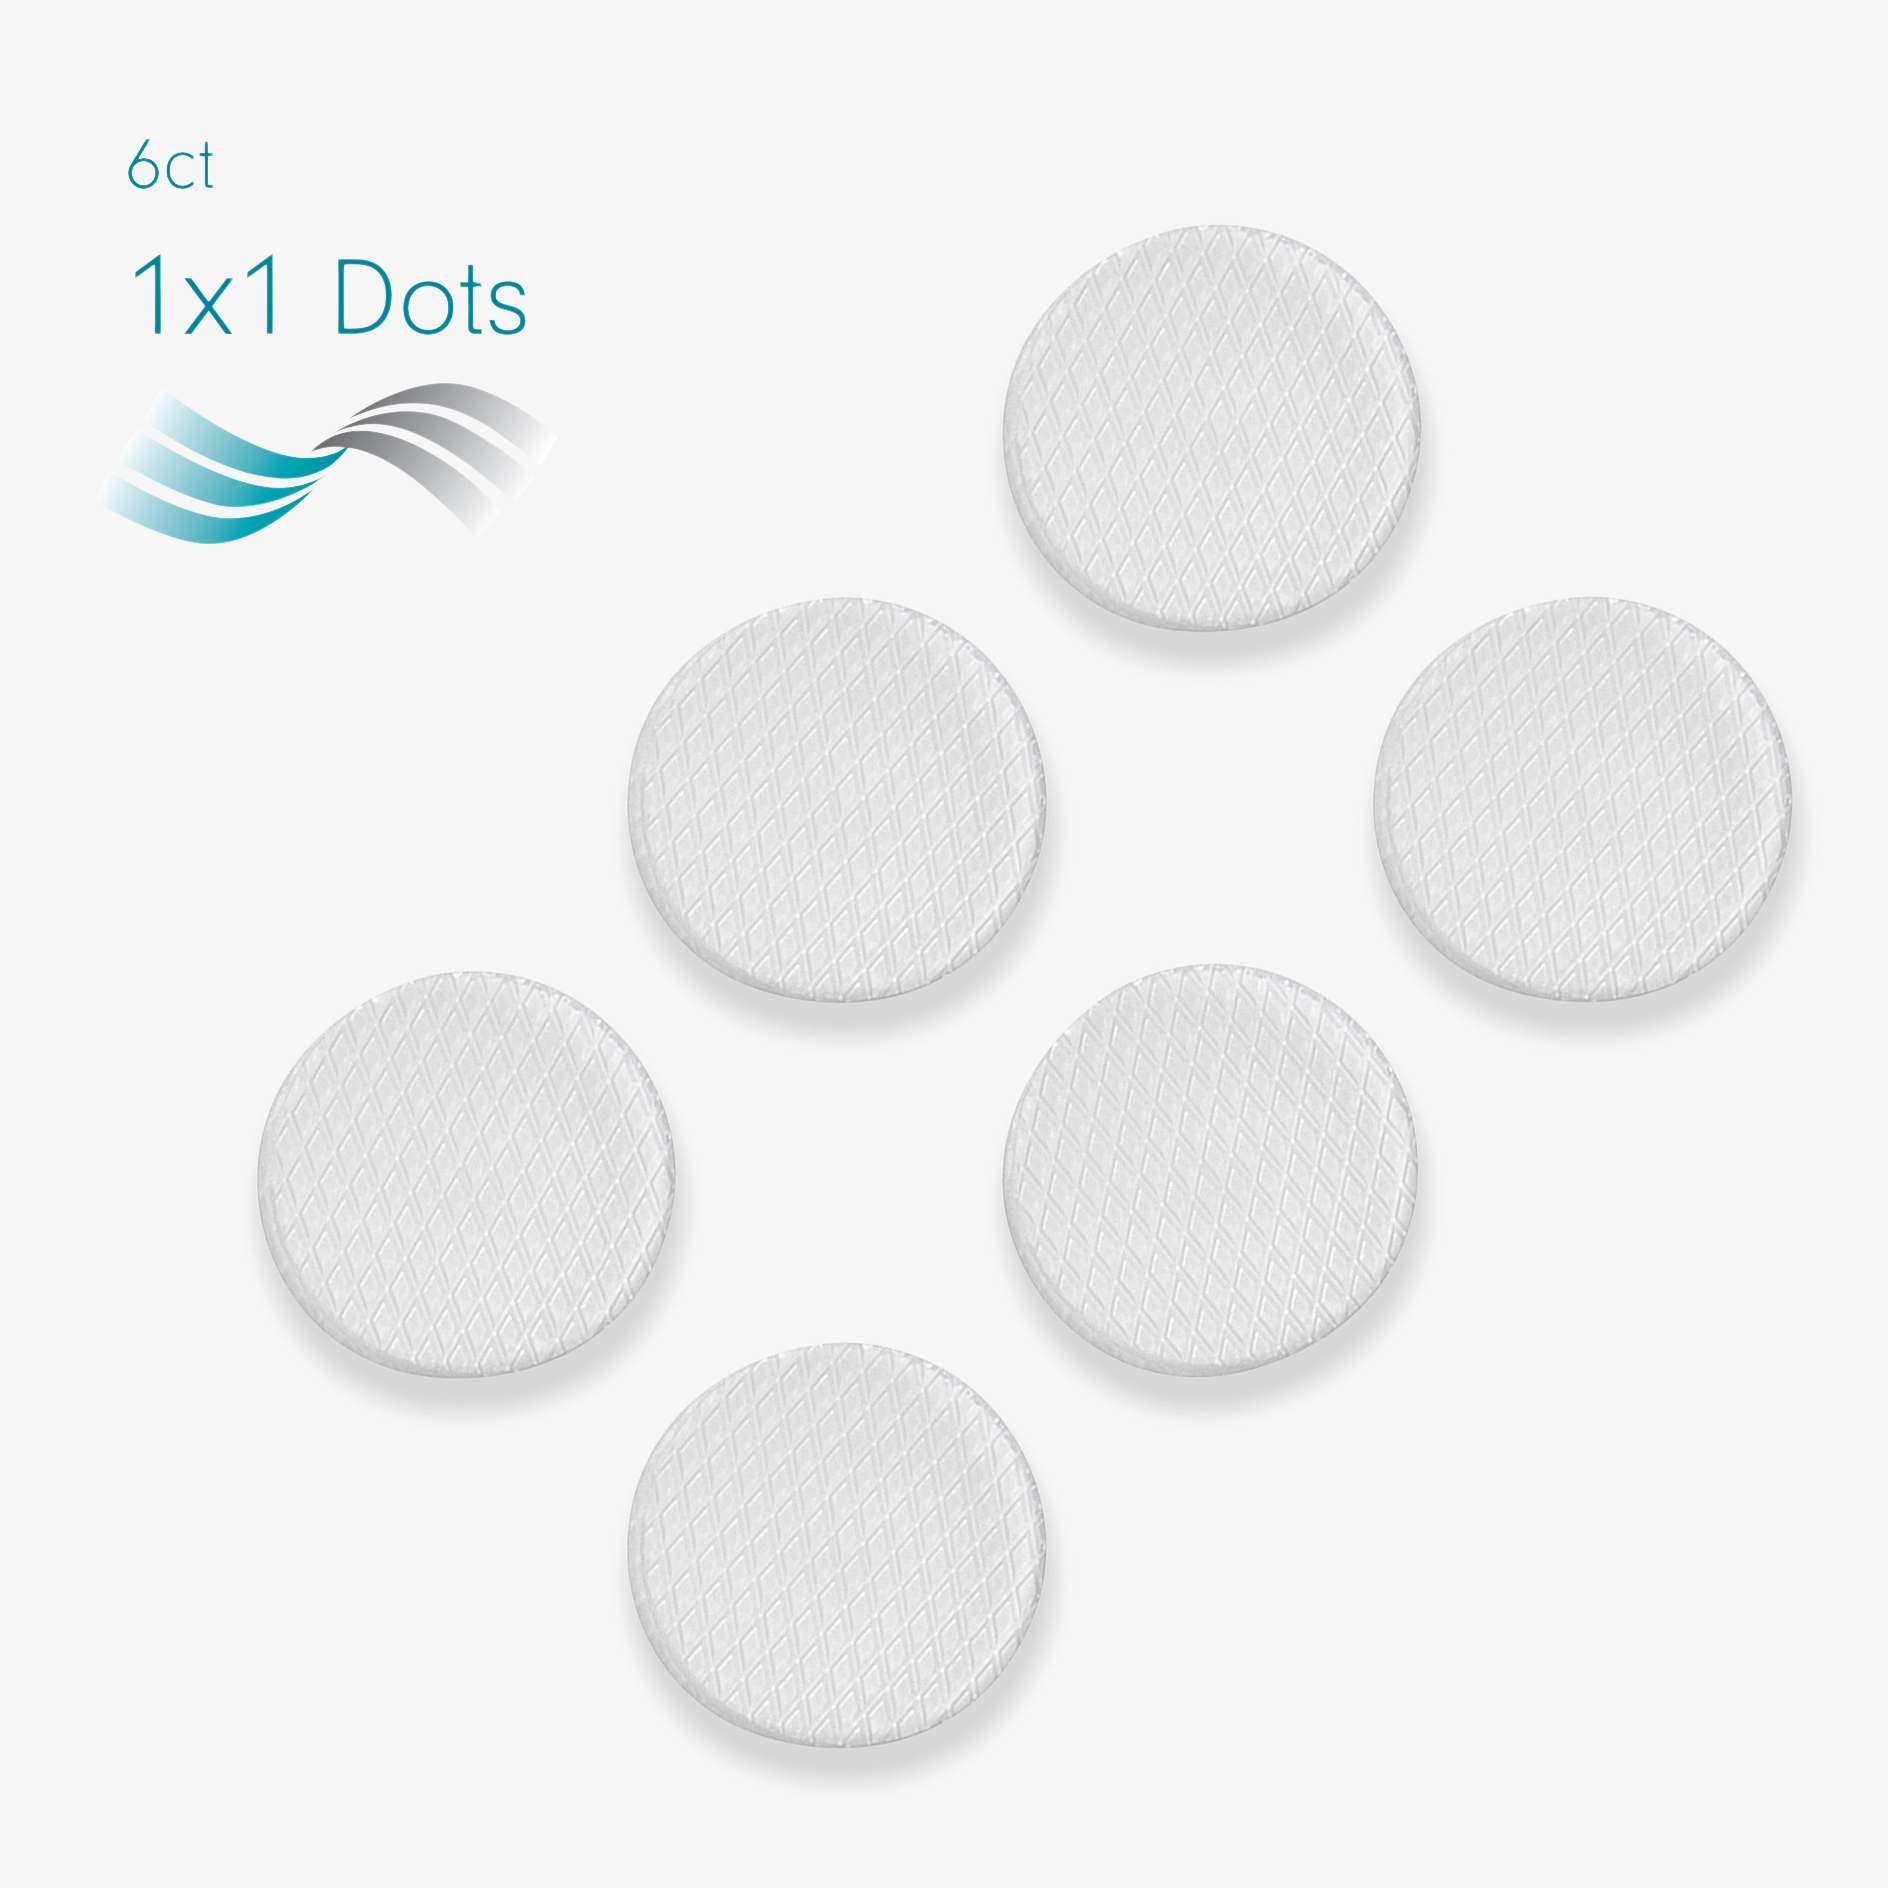 Advanced Medical-Grade Silicone Gel Dots showing 6 count | clear